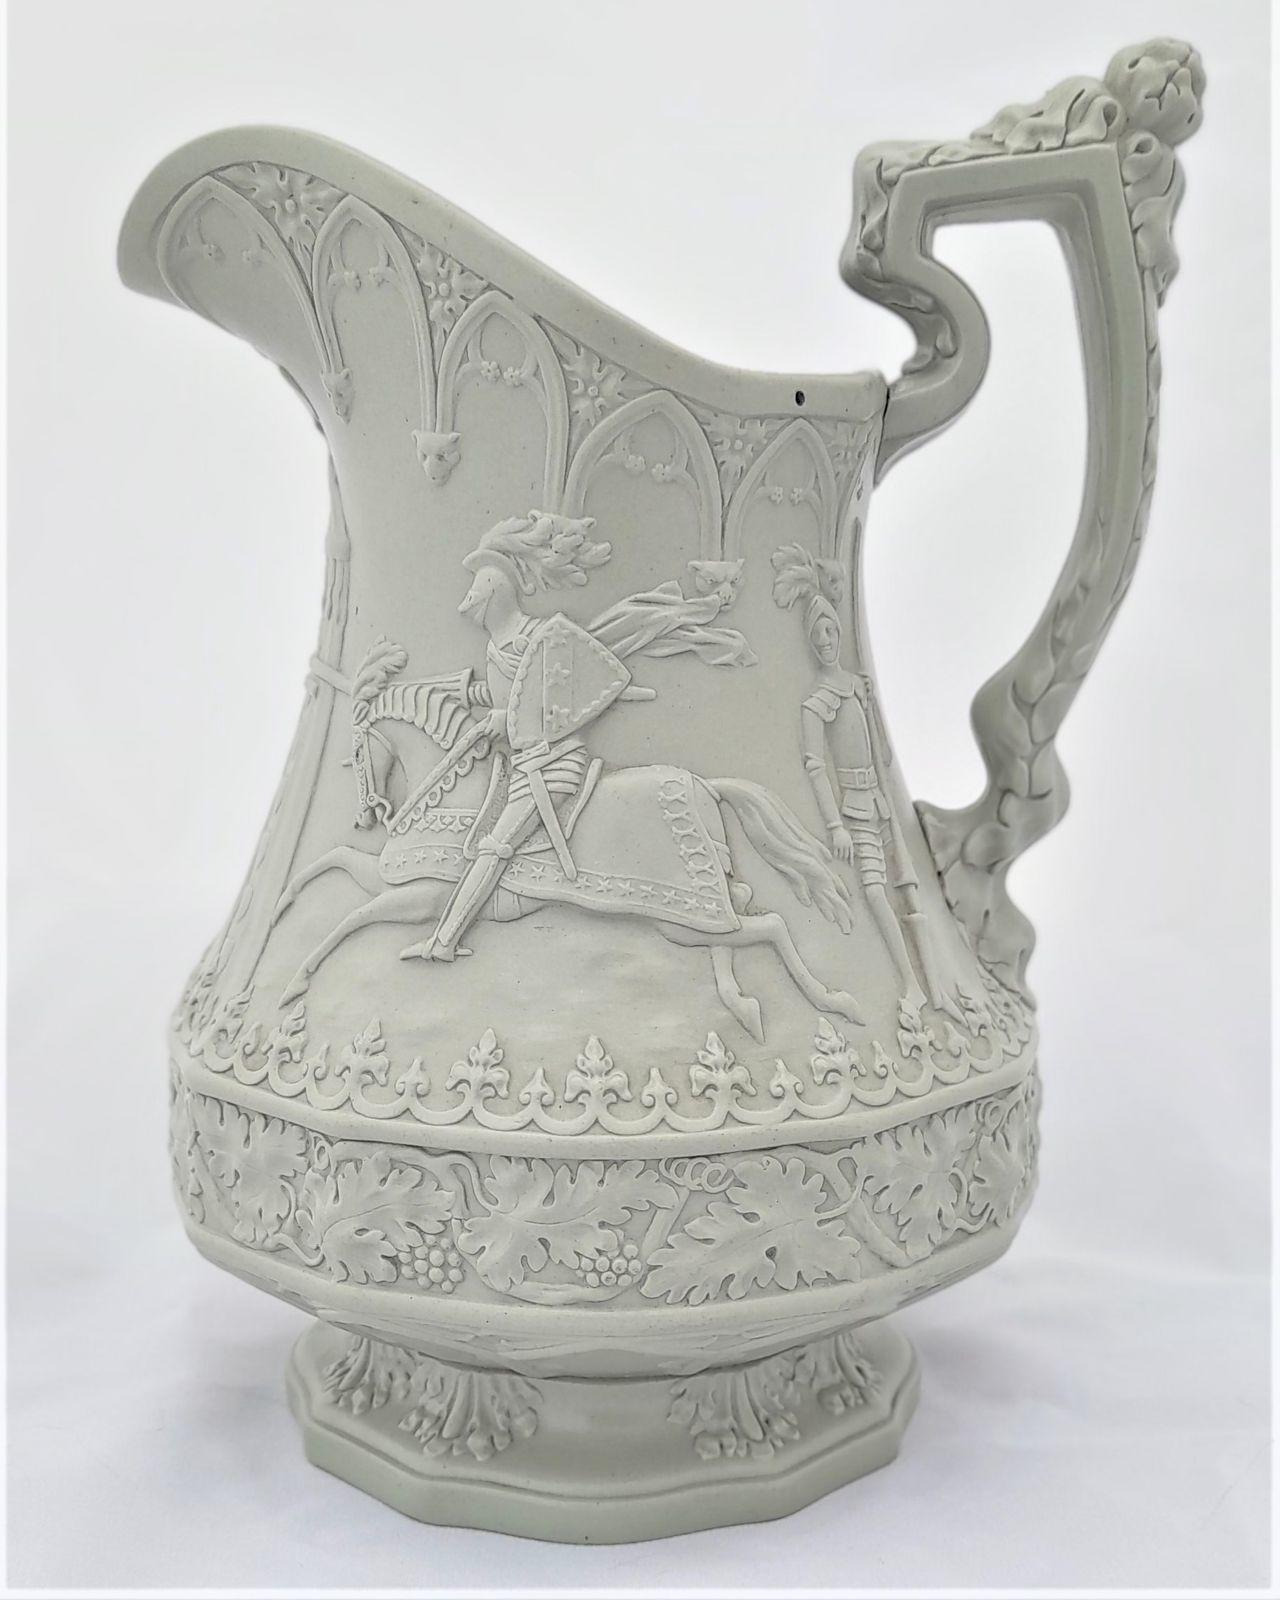 An antique William Ridgway, son and company light sage green stoneware relief moulded jug with the Eglinton Jousting tournament design of jousting knights on horseback and standing figures in armour. First published on 1st September 1840. 19 cm high